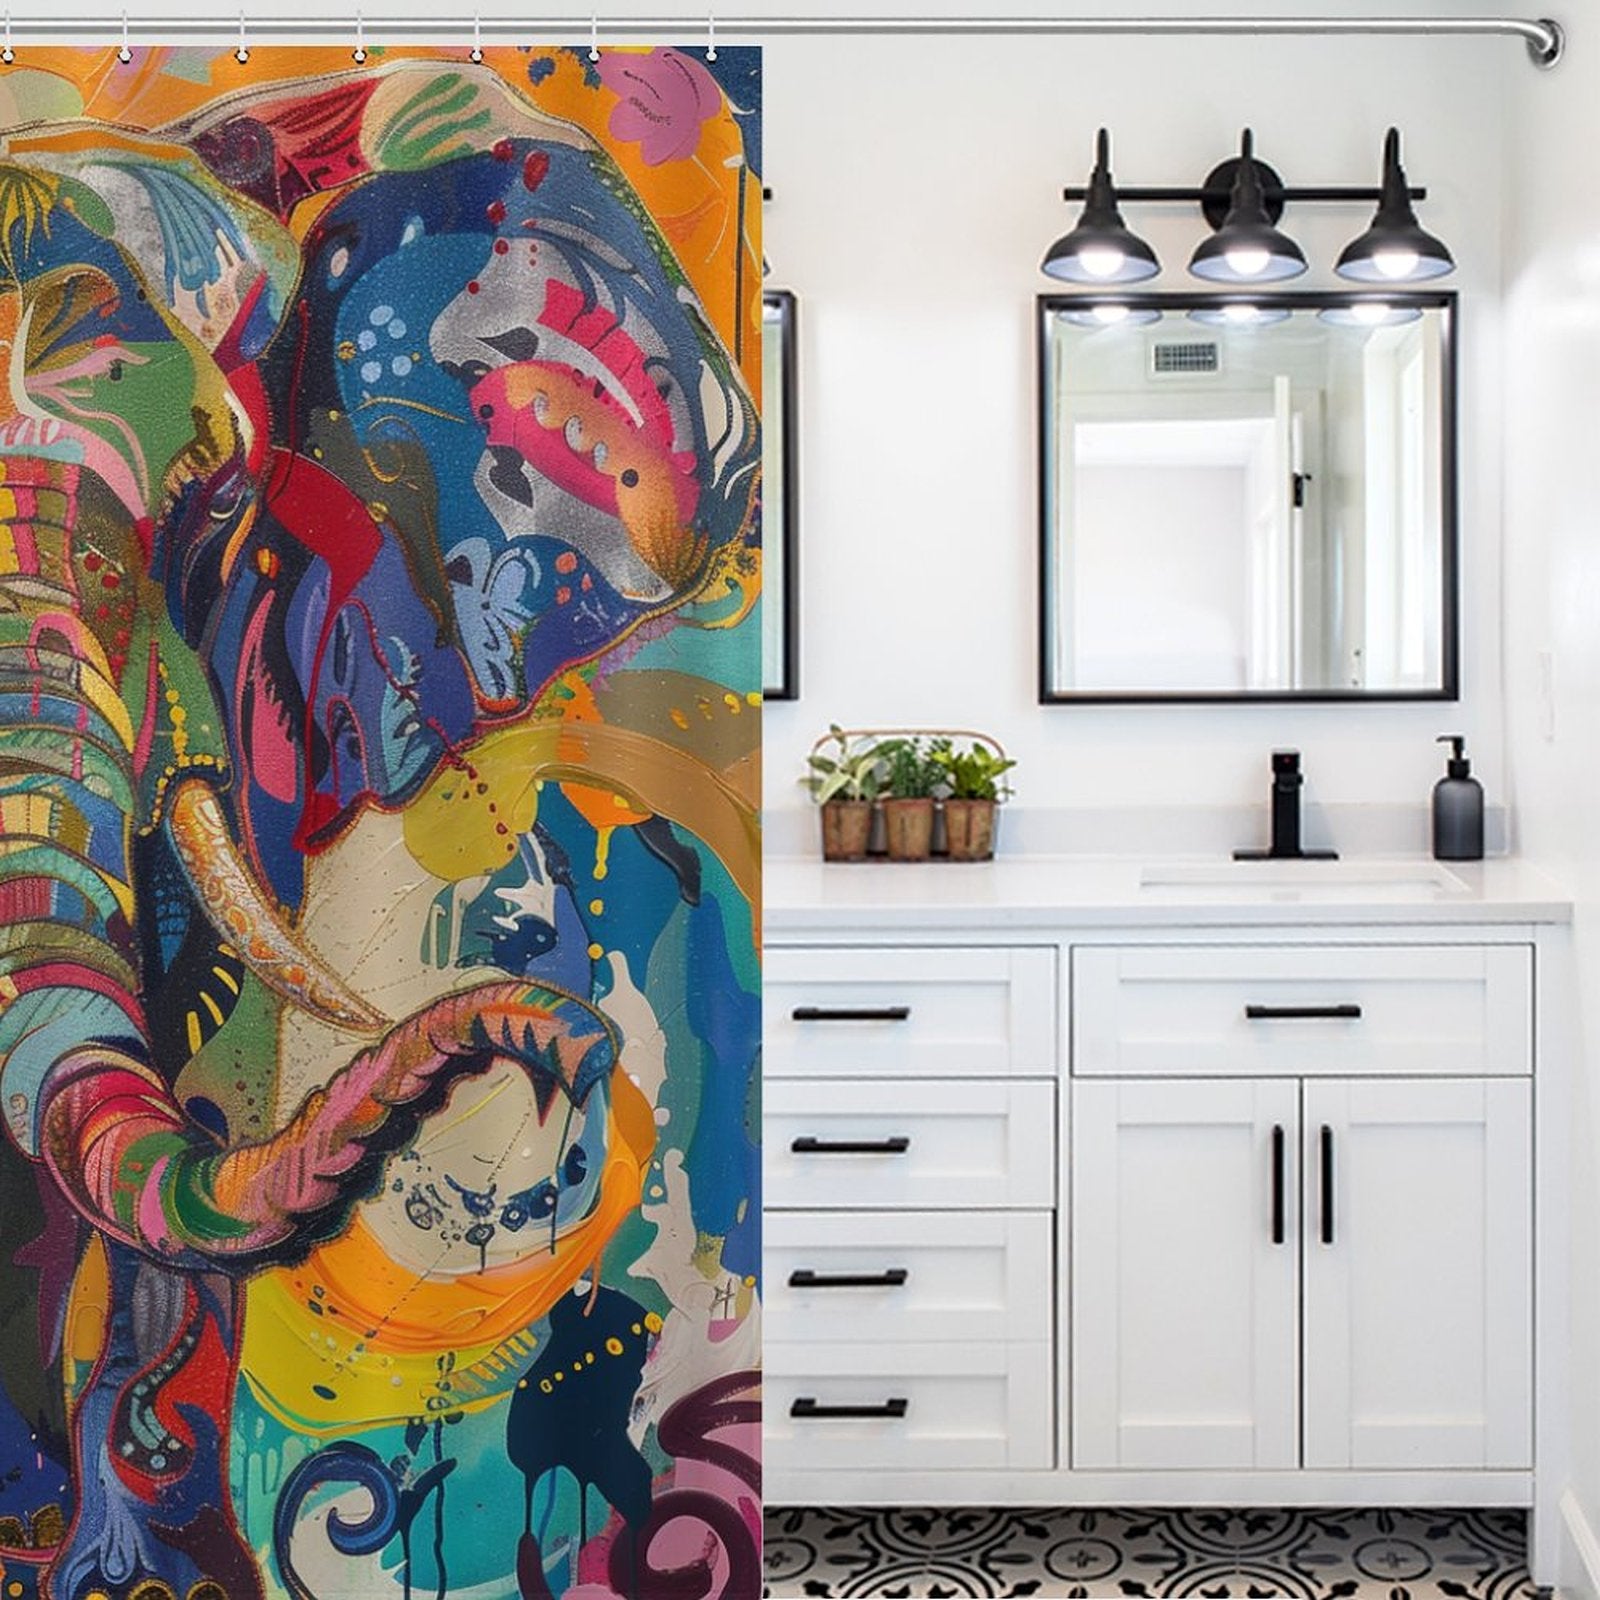 A bathroom with white cabinets, black fixtures, and a vibrant Cotton Cat Multi Colored Happy Elephant Shower Curtain-Cottoncat. There is a mirror above the sink and a light fixture with three bulbs, enhancing the cheerful bathroom decor.